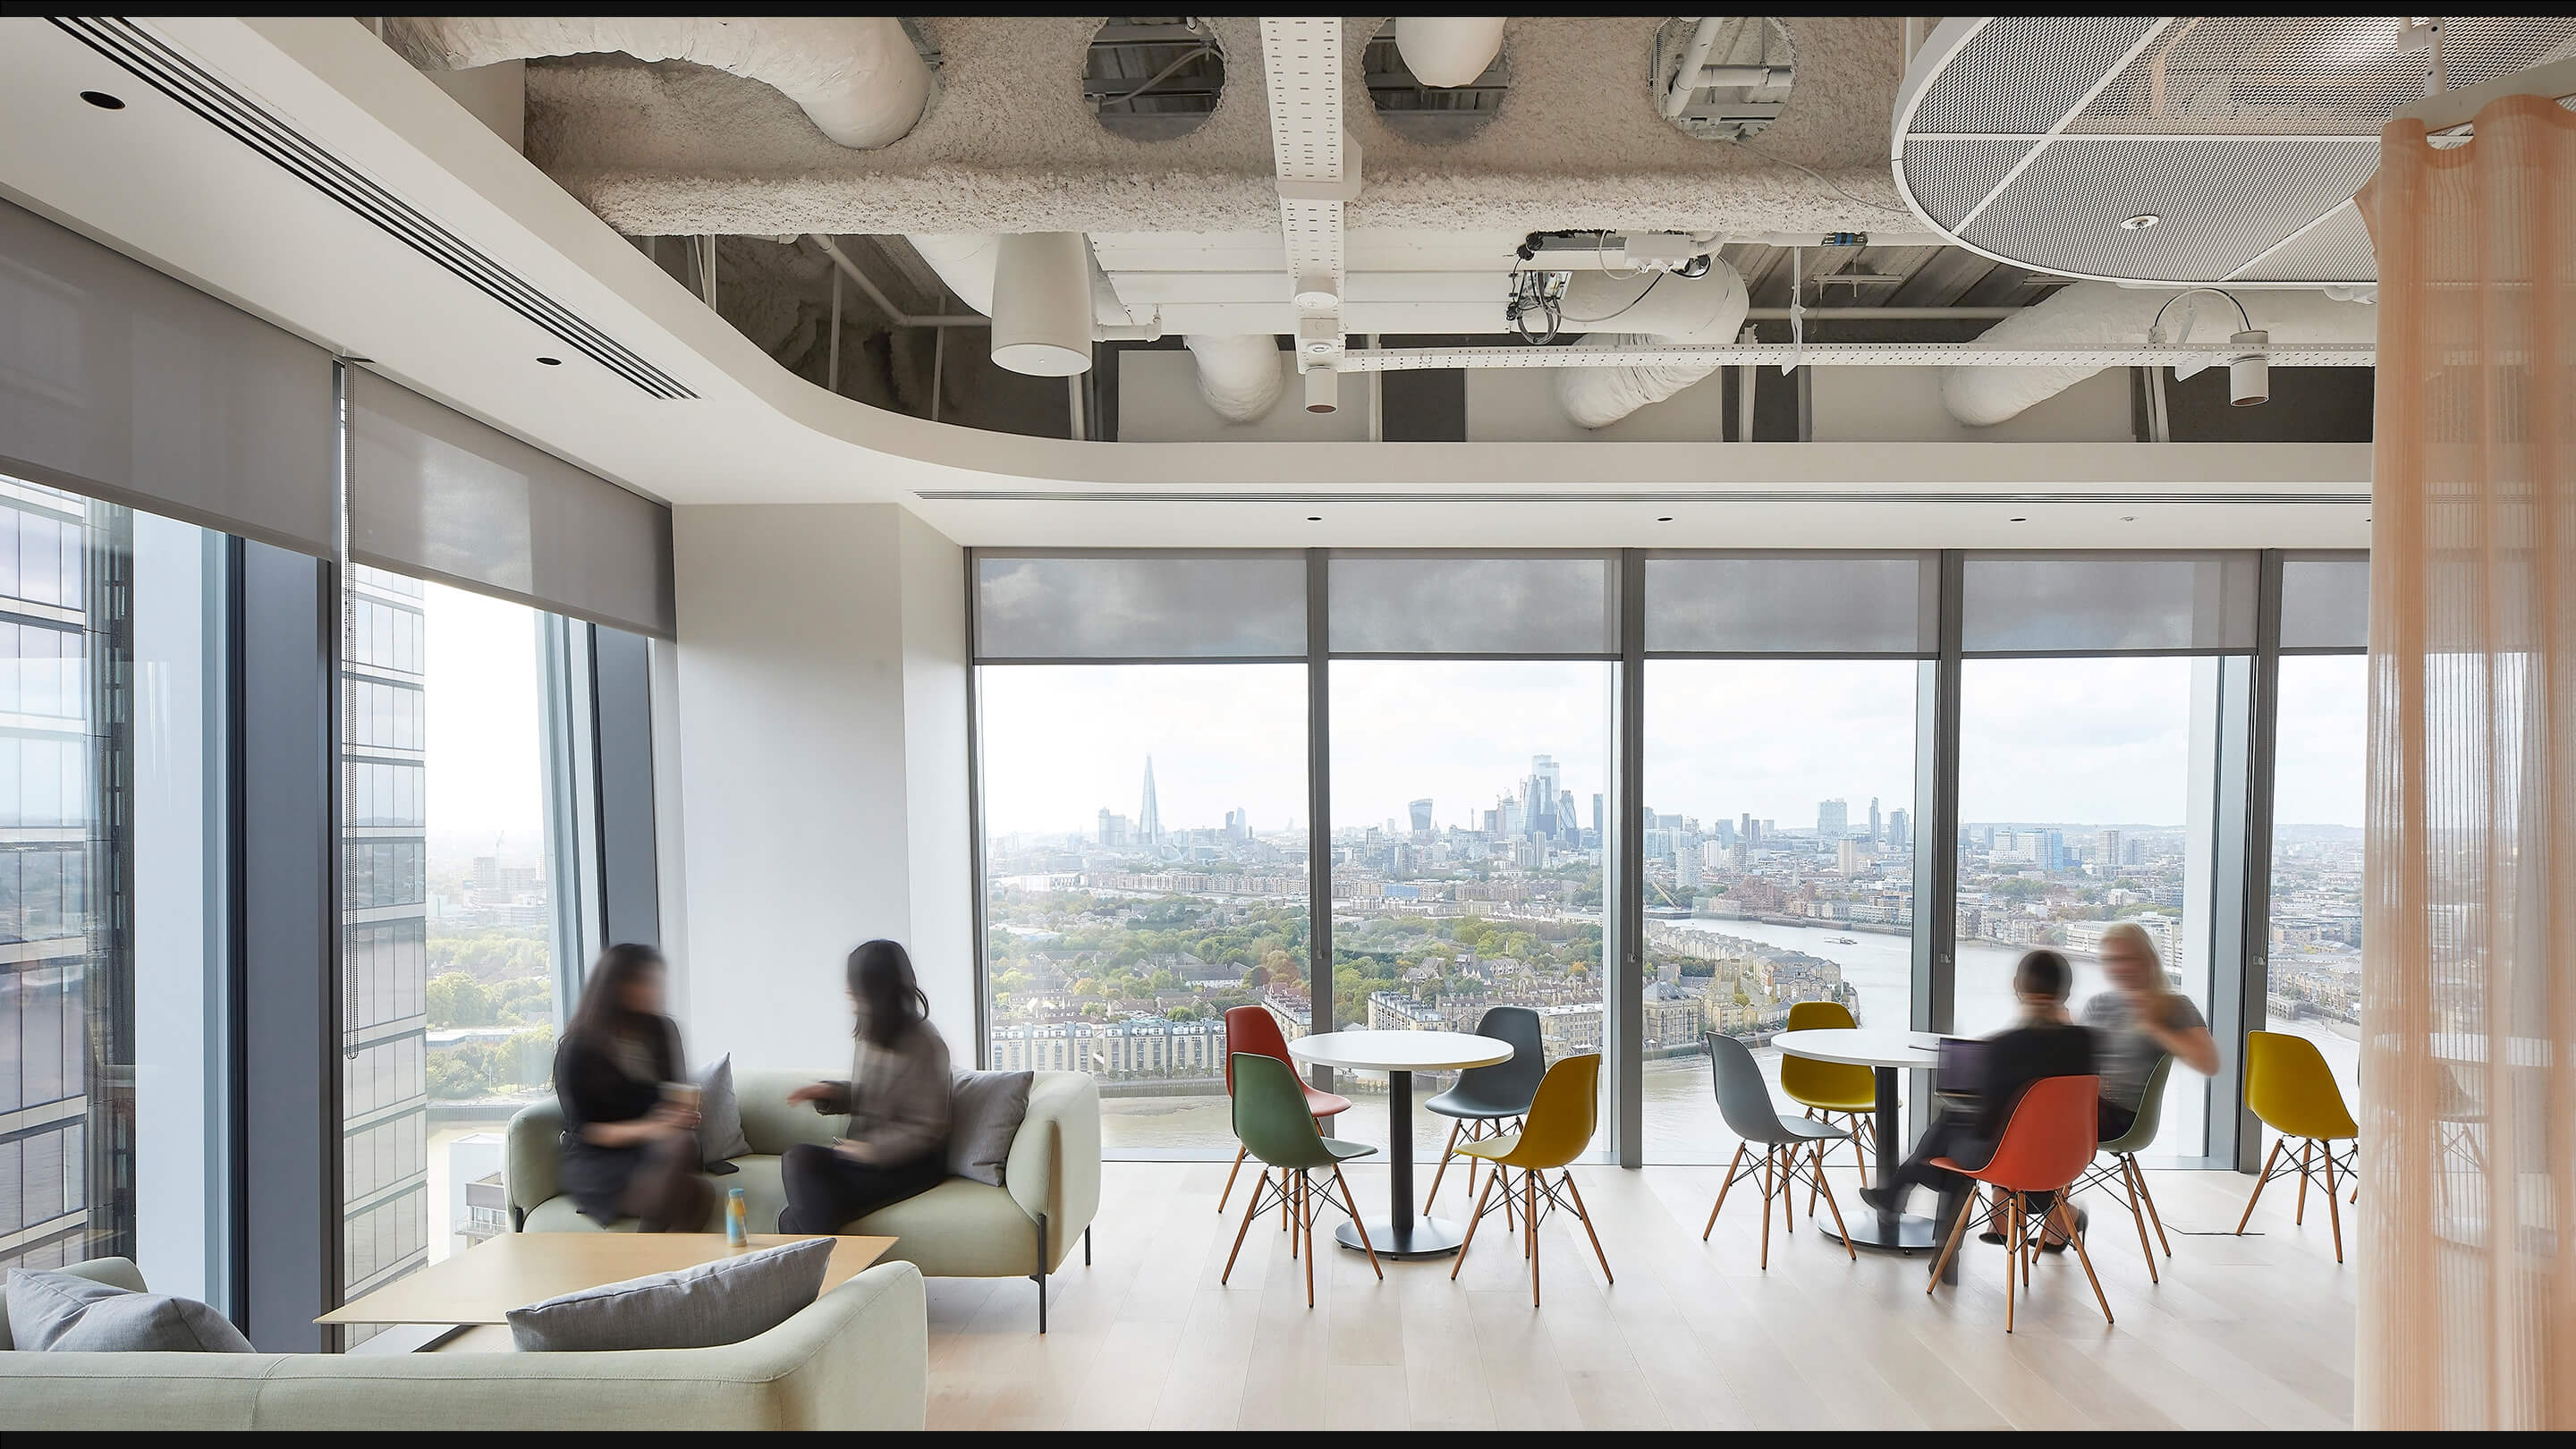 Each space has its own unique identity and offers flexibility for different working styles and the various events that the EBRD hosts. For example, this seating area by the café on level 24 allows for solitary work or informal collaboration. (Photo Source: EBRD)